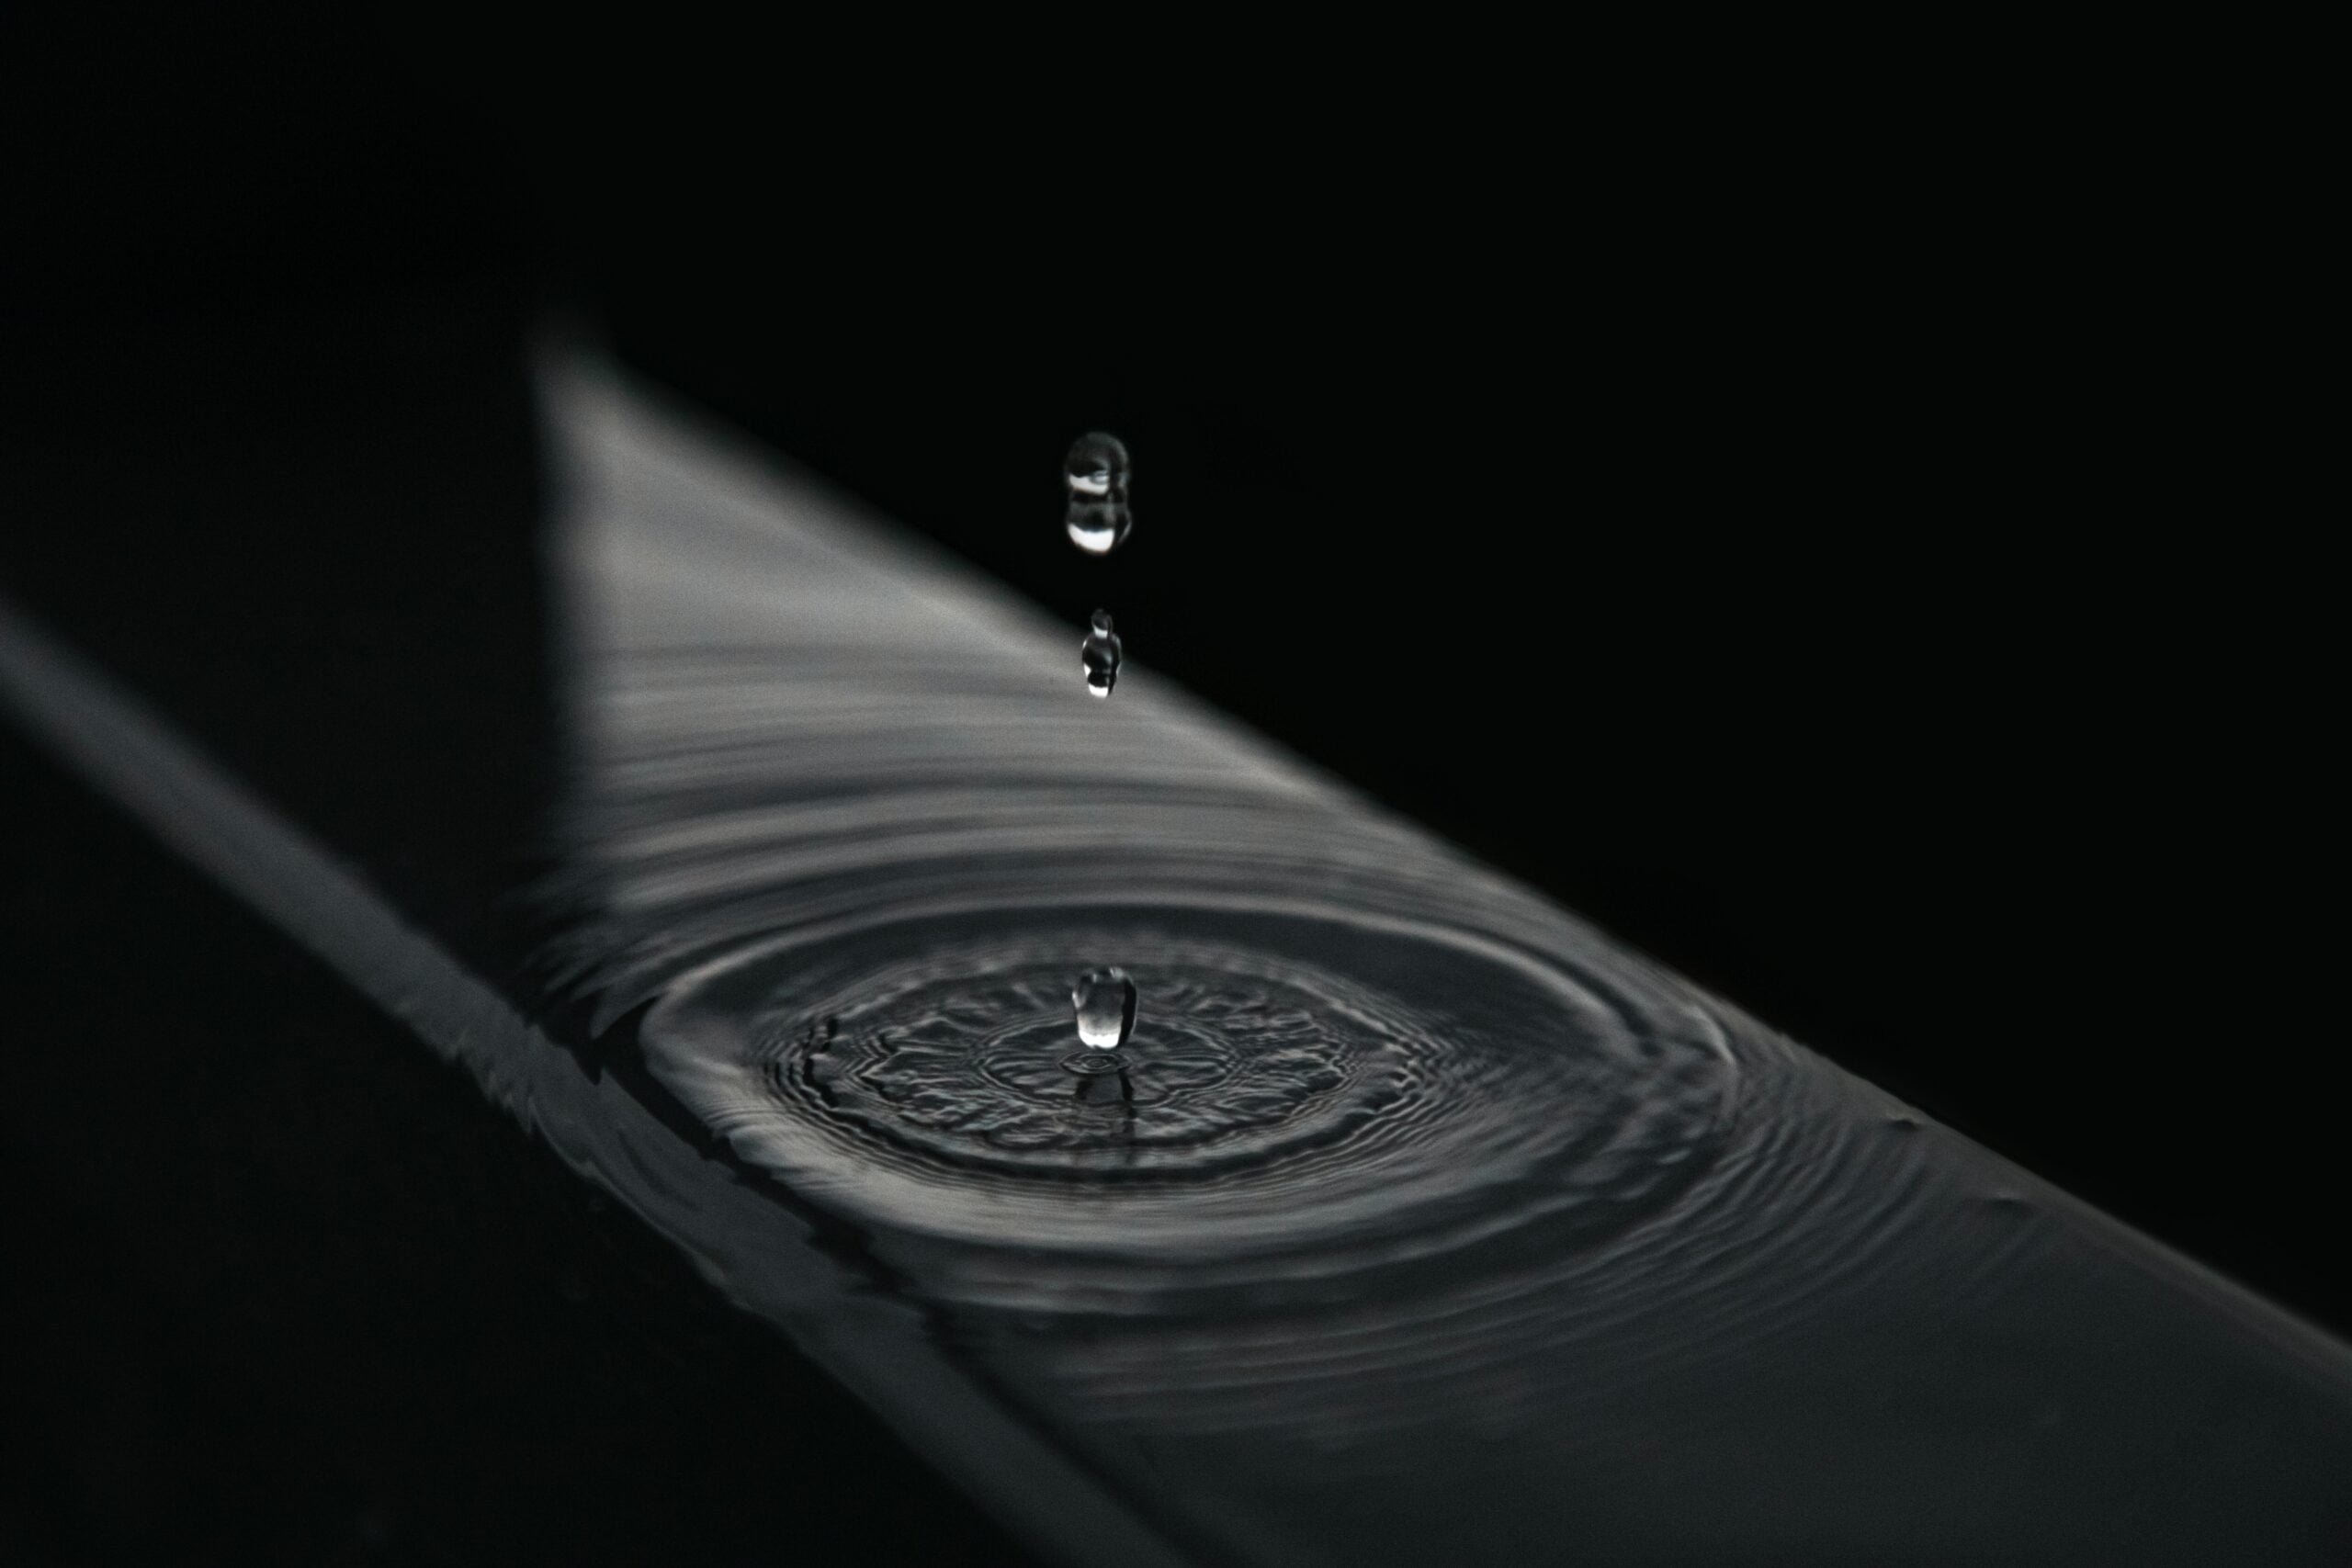 Depicts water drops falling into a pool of water and causing ripples. Used as a cover image for a news article on Republic launching their secondary market in beta.